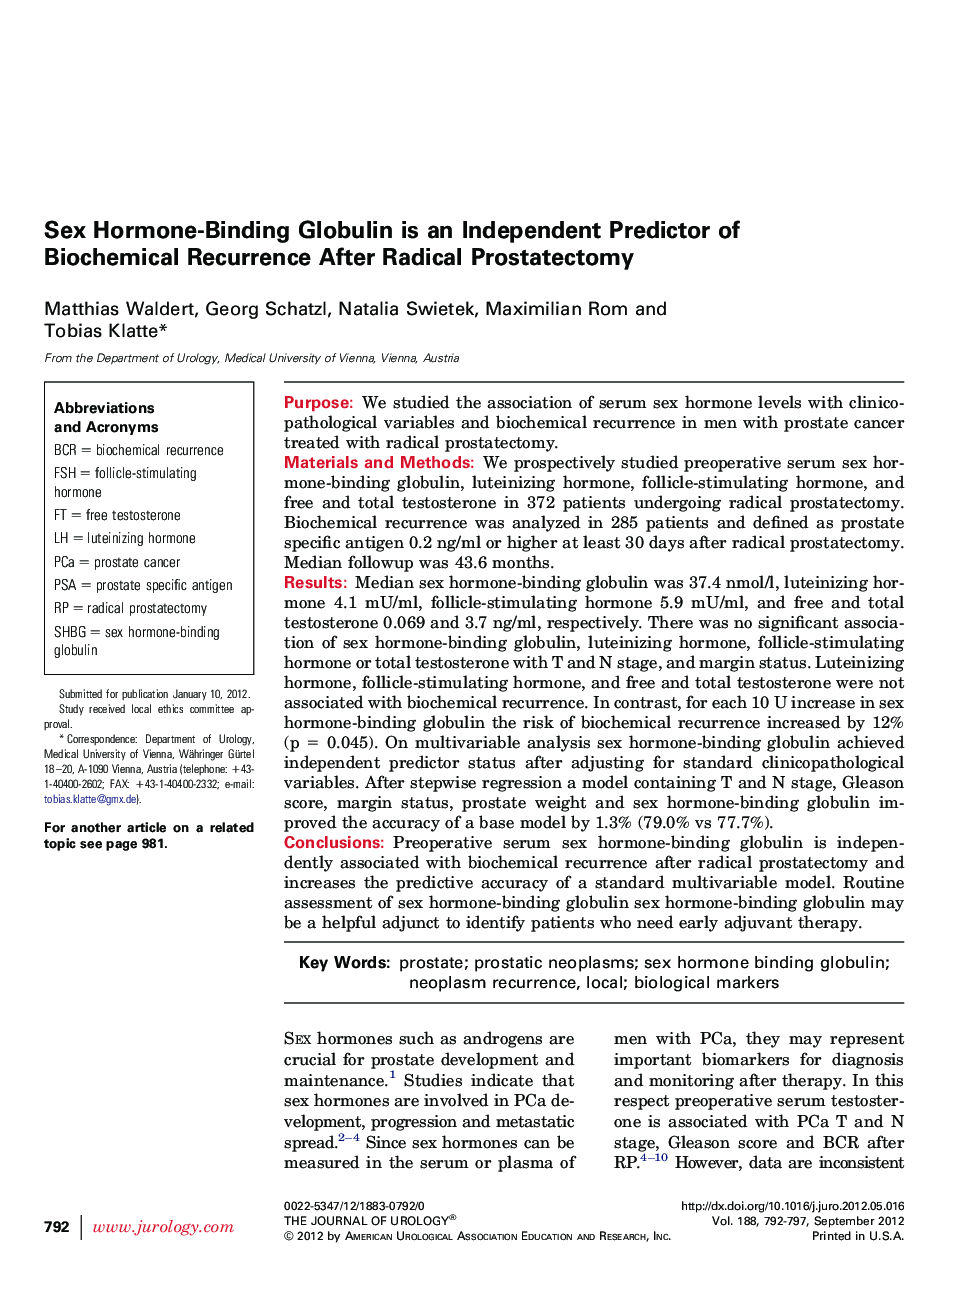 Sex Hormone-Binding Globulin is an Independent Predictor of Biochemical Recurrence After Radical Prostatectomy 